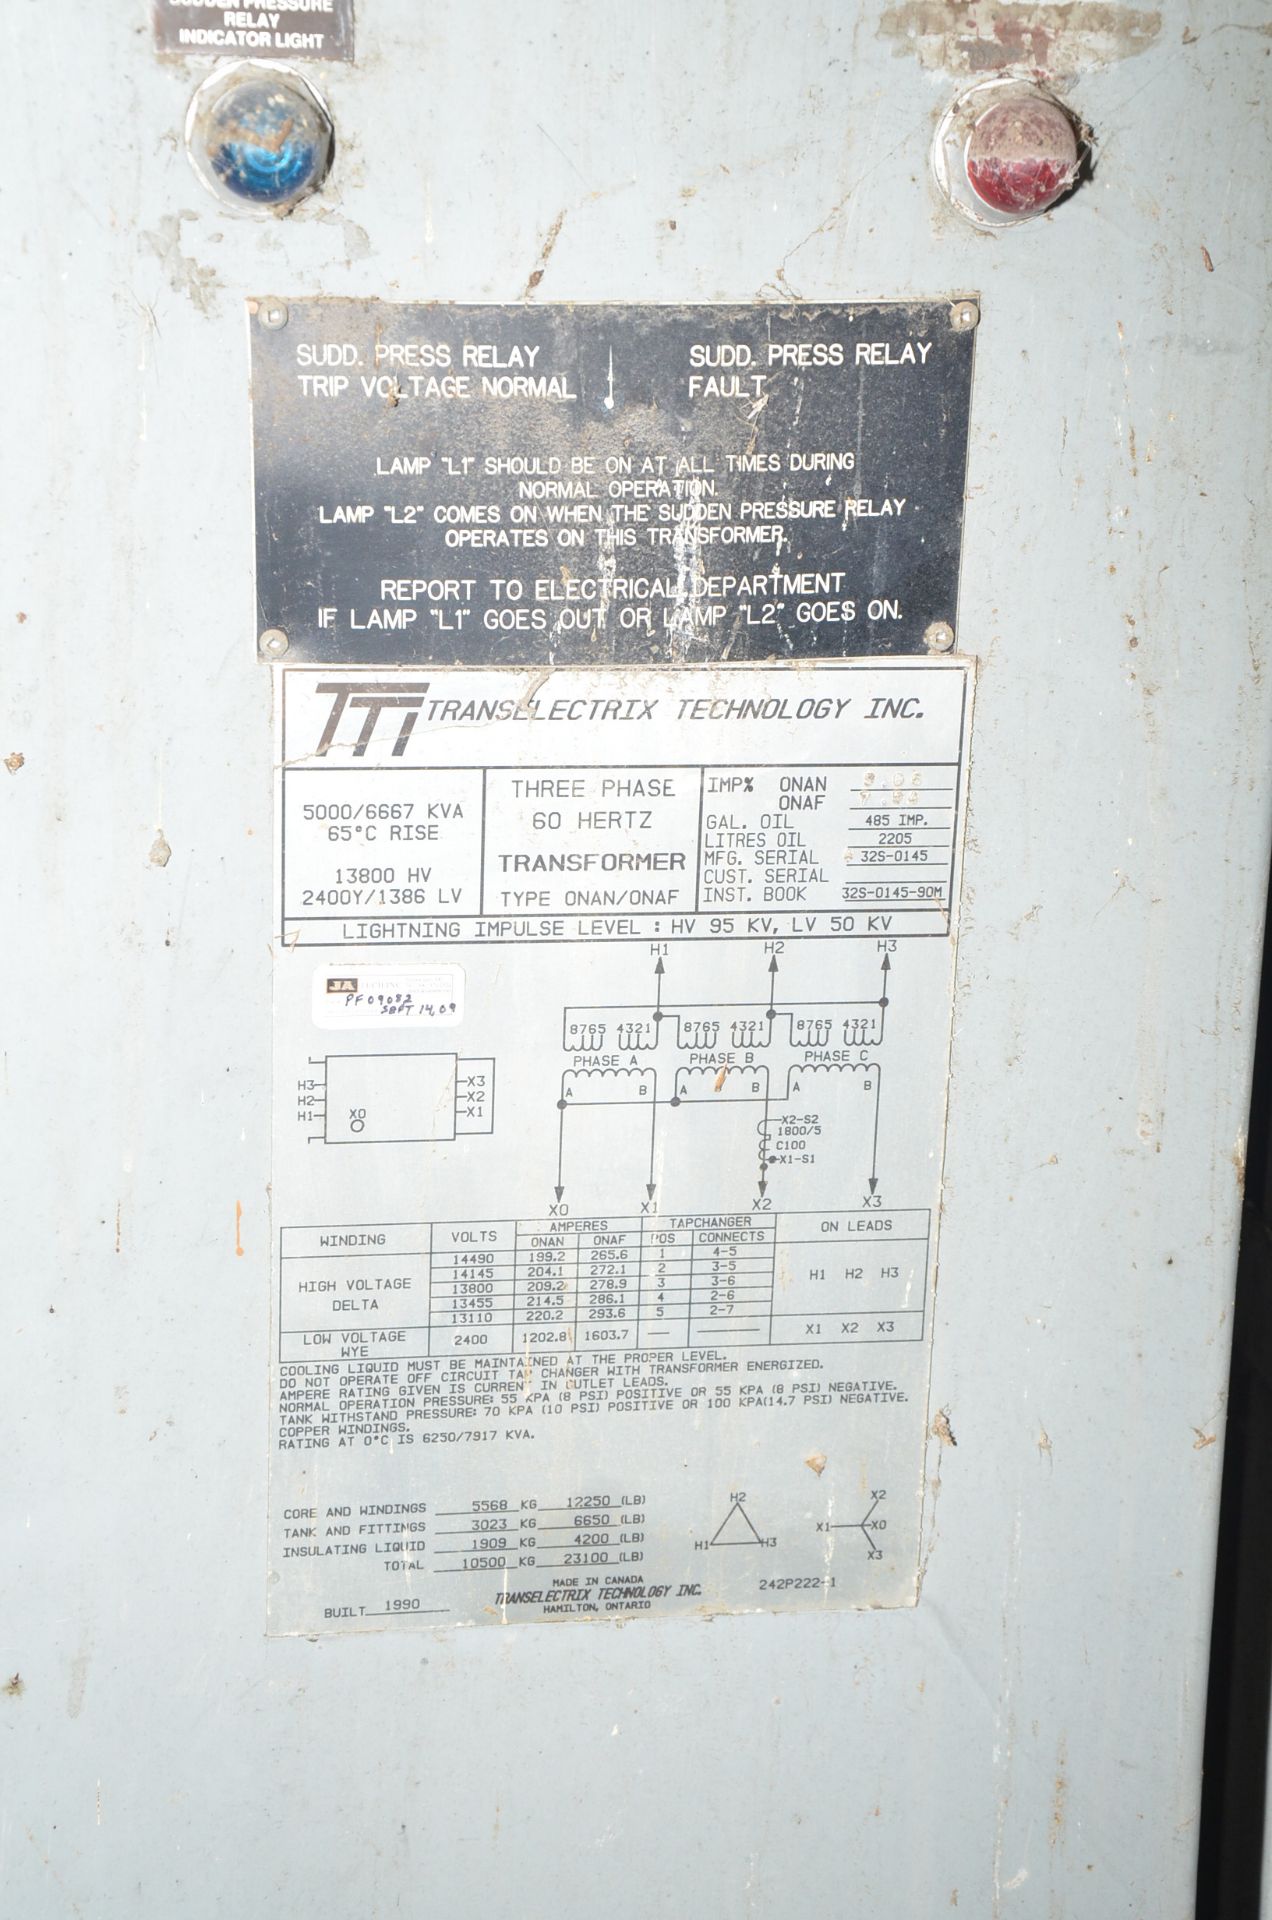 LOT/ TRANSELECTRIX 5000-6667KVA/14000-2400V/3PH/60HZ OUTDOOR PAD-TYPE TRANSFORMER, S/N: 32S-0145 AND - Image 3 of 5